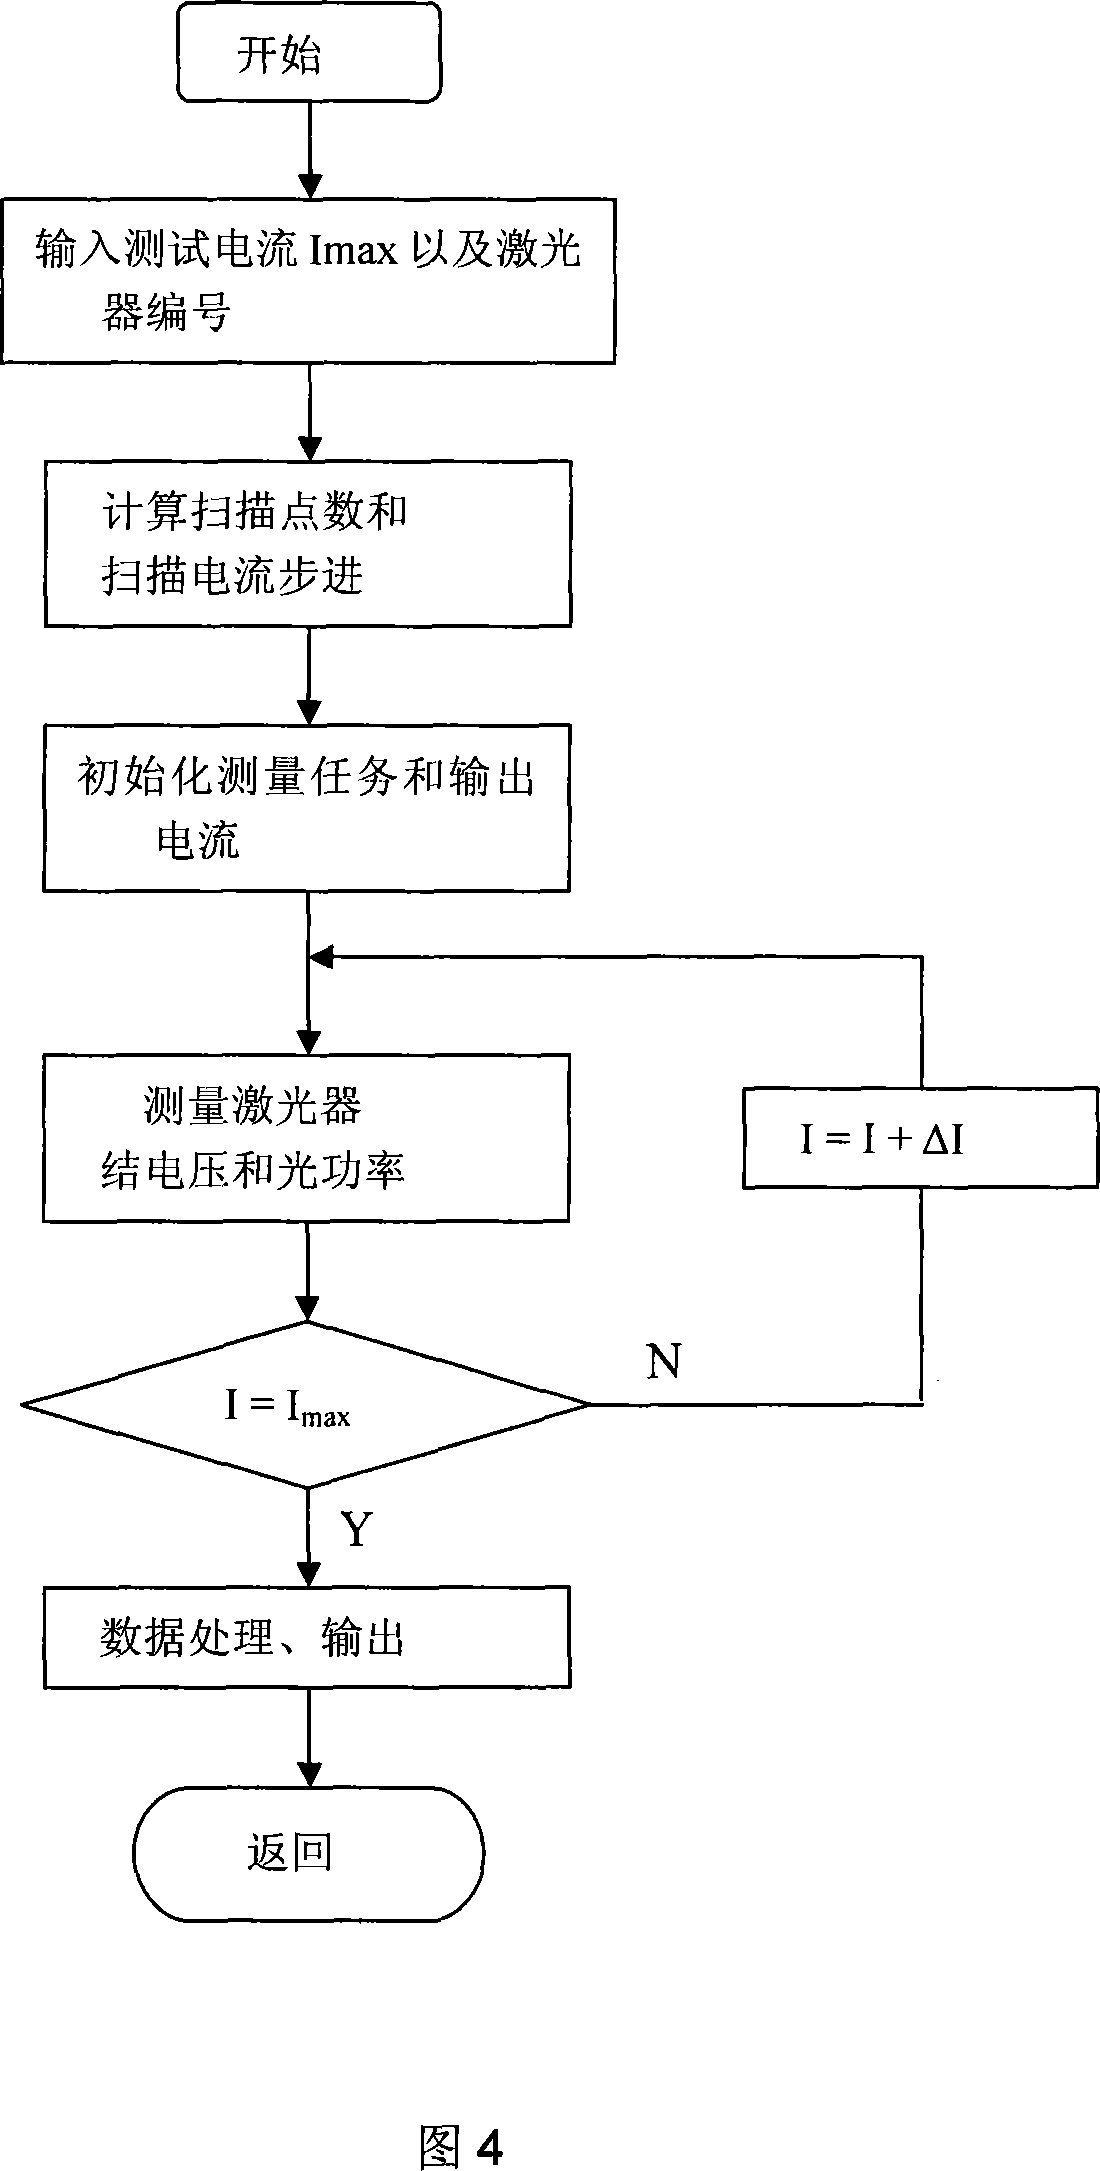 High power semiconductor laser device reliability detection method